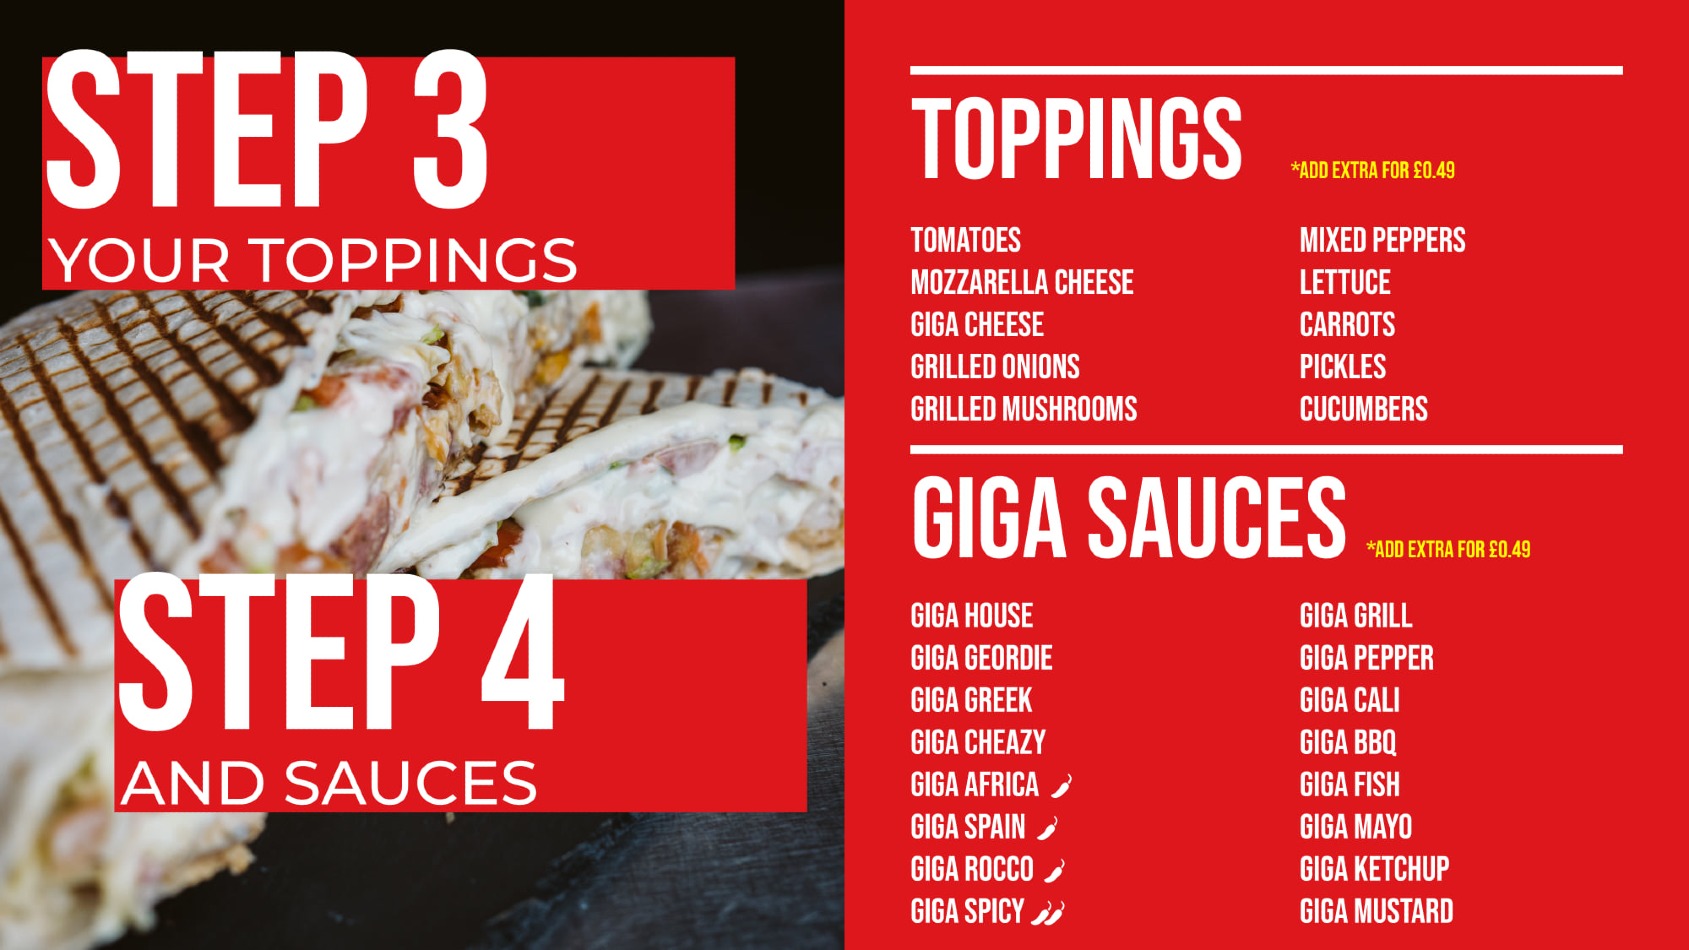 Takeaway Restaurant Menu Page - GIGA TACOS French-Moroccan Tacos - Newcastle upon Tyne